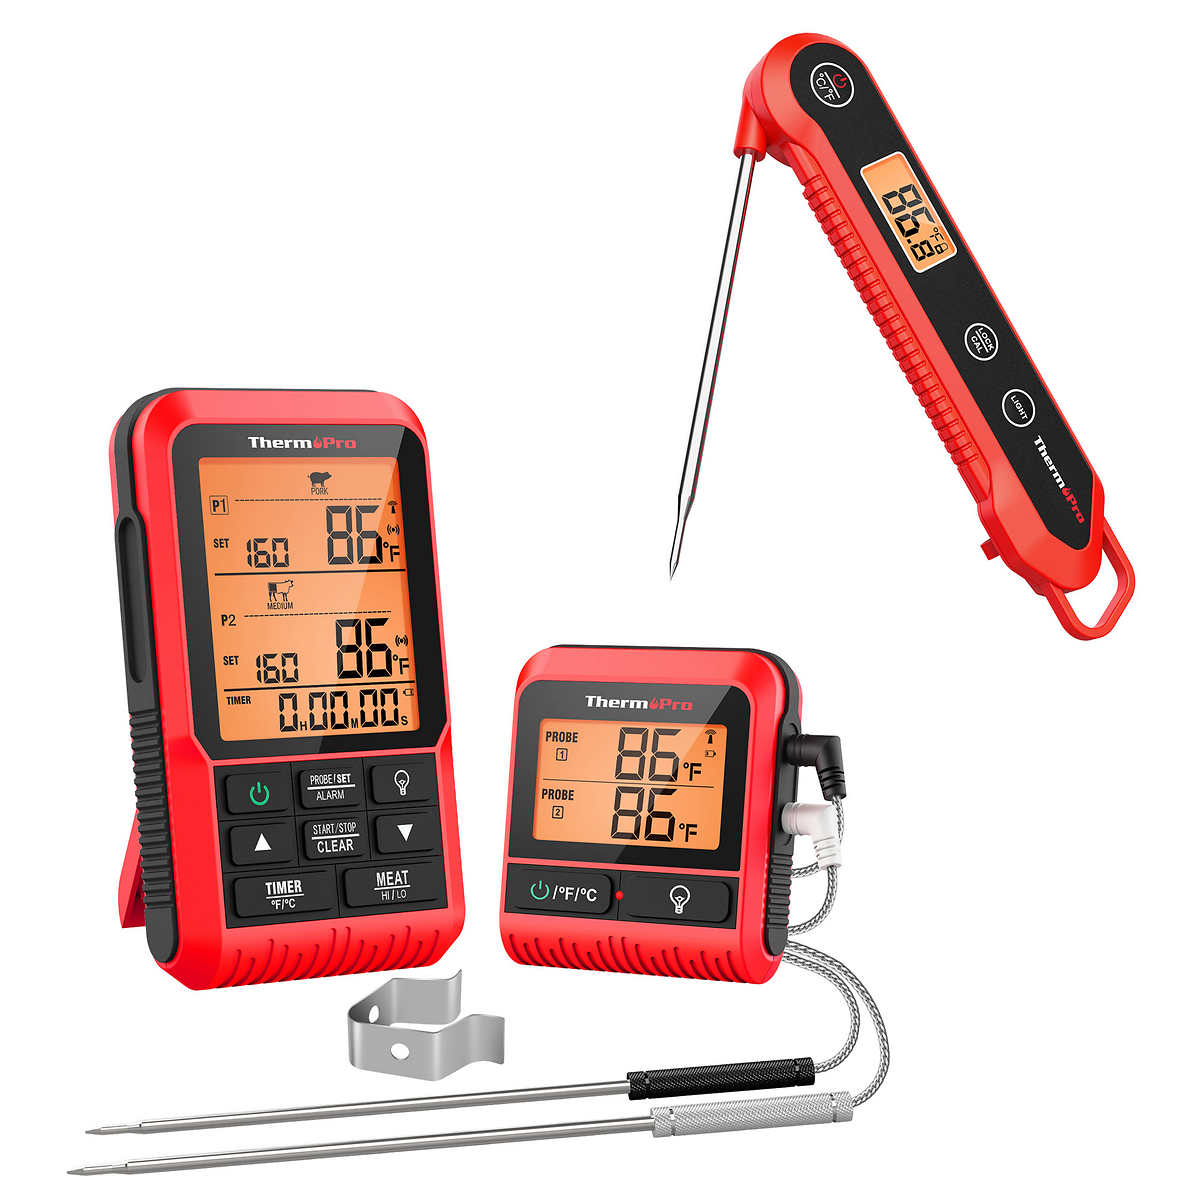 ThermoPro Cooking Thermometer Bundle (Includes TP826BW and TP03HW) at Costco In Store (34.99 Online) $24.99